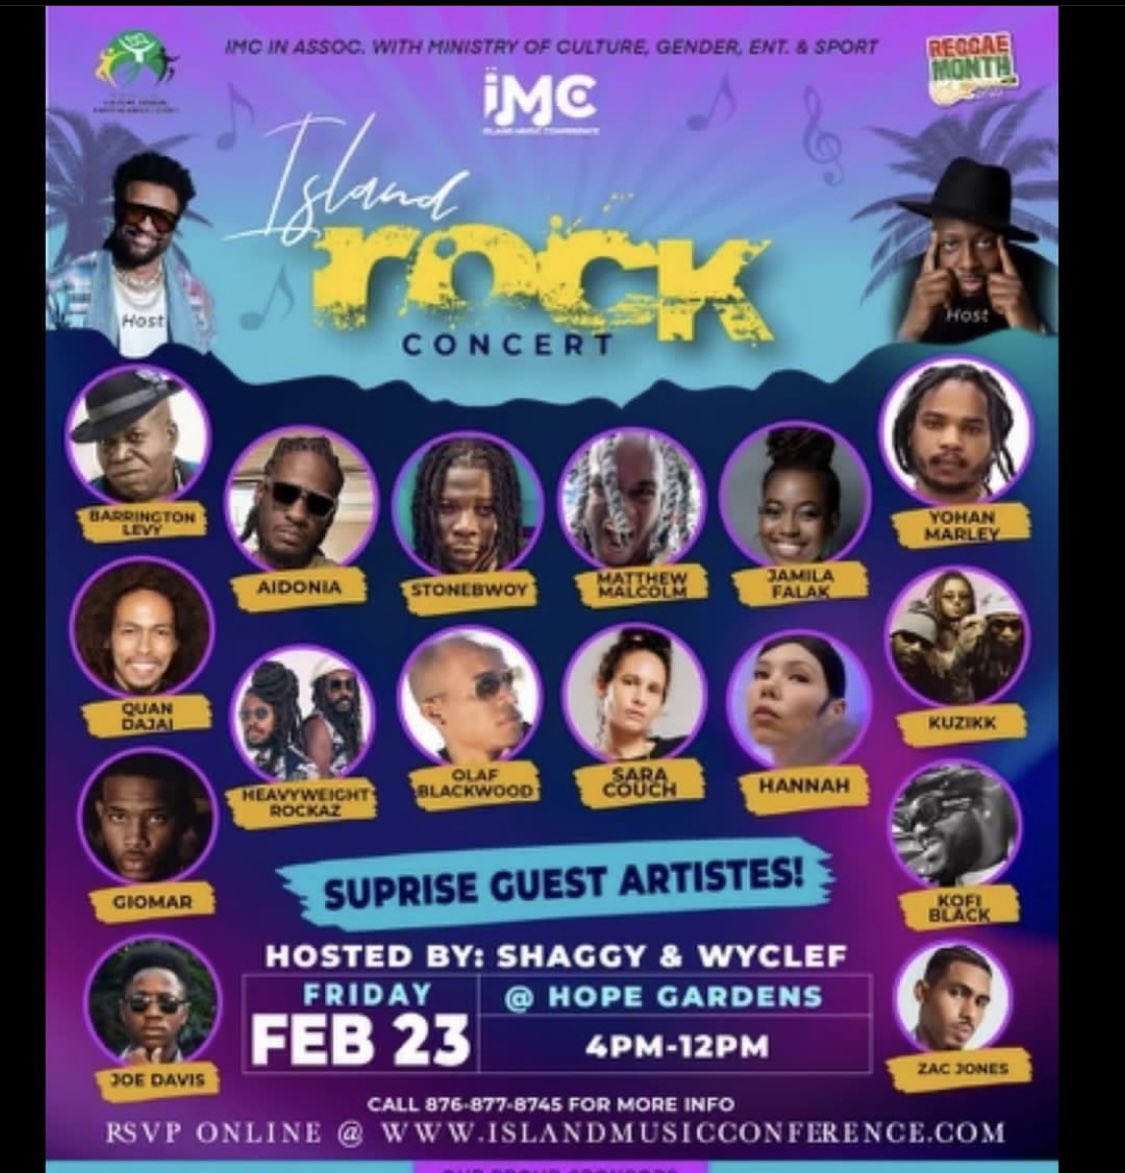 Stonebwoy will be performing live at the 'Island Rock Concert' in Jamaica on February 23rd, along with Yohan Marley, Barrington Levy, Aidonia, and other notable music crooners.
#BhimNationGlobal 🌎